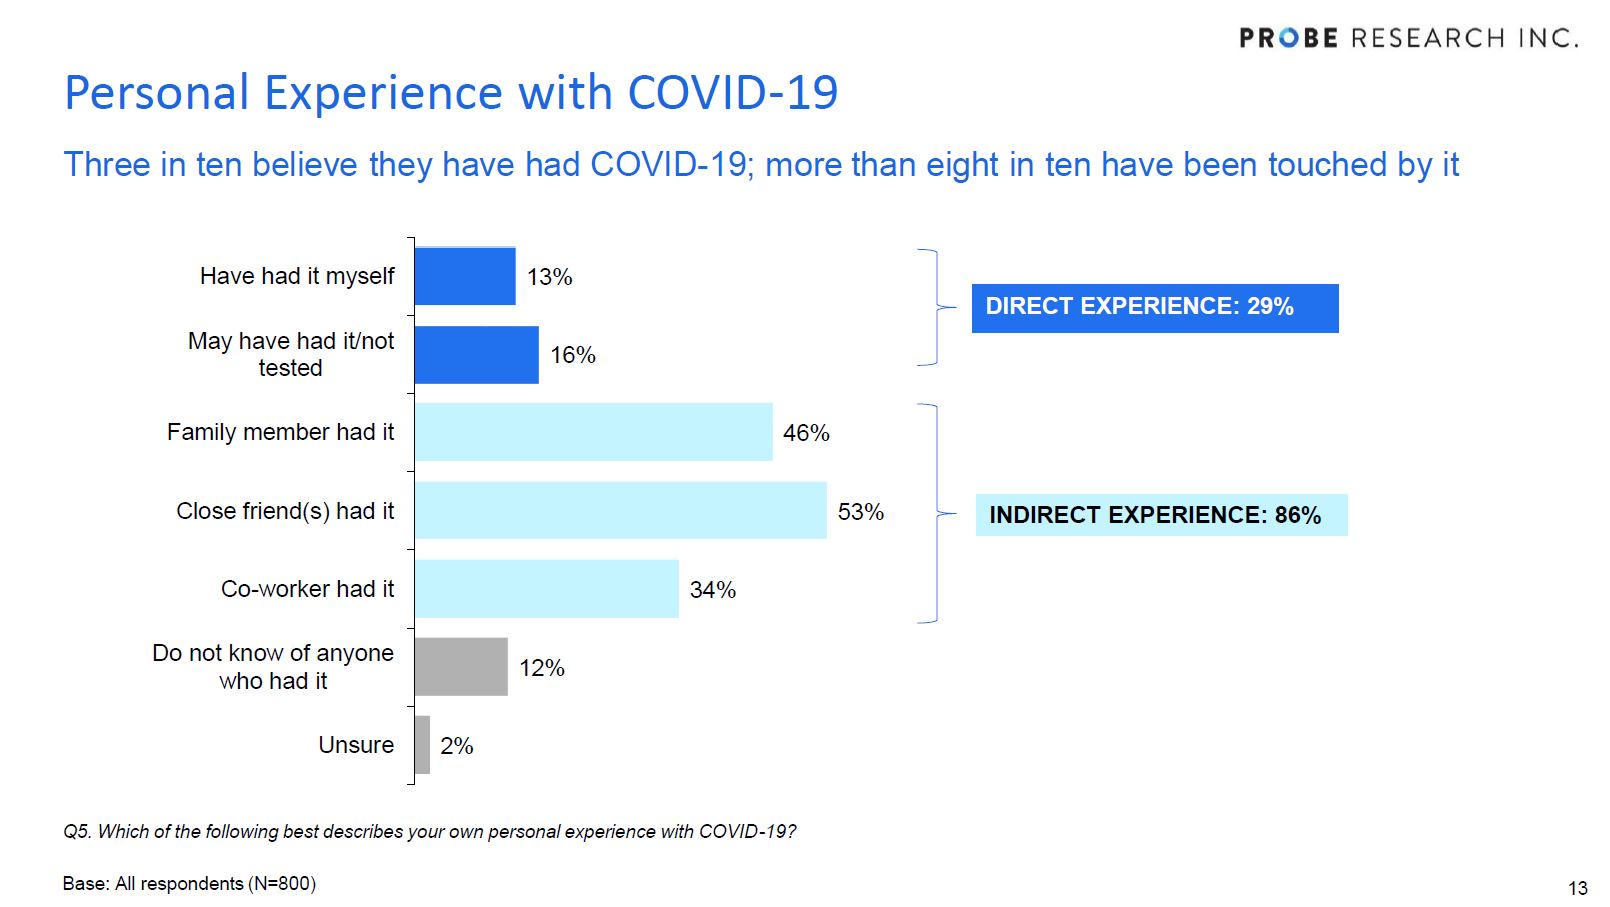 chart showing direct and indirect experience with COVID-19